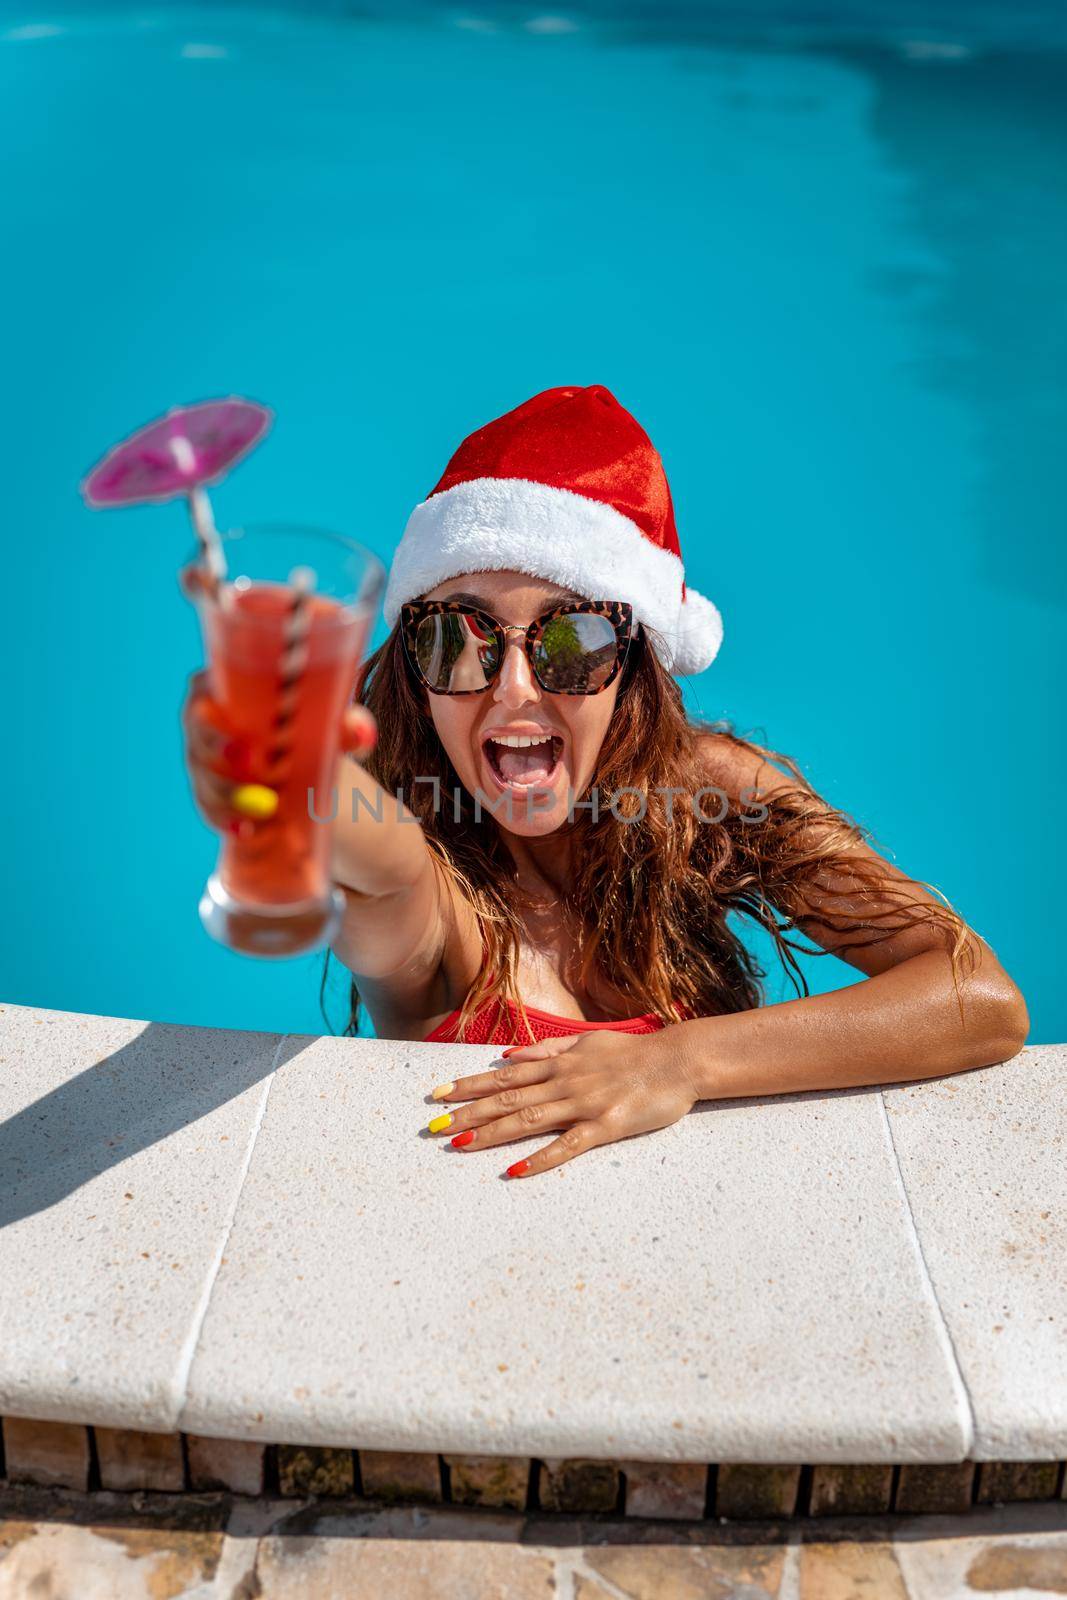 Young beautiful woman in the swimming pool in Santa Claus hat celebrating New Year and Christmas in hot country with glass of cocktail.